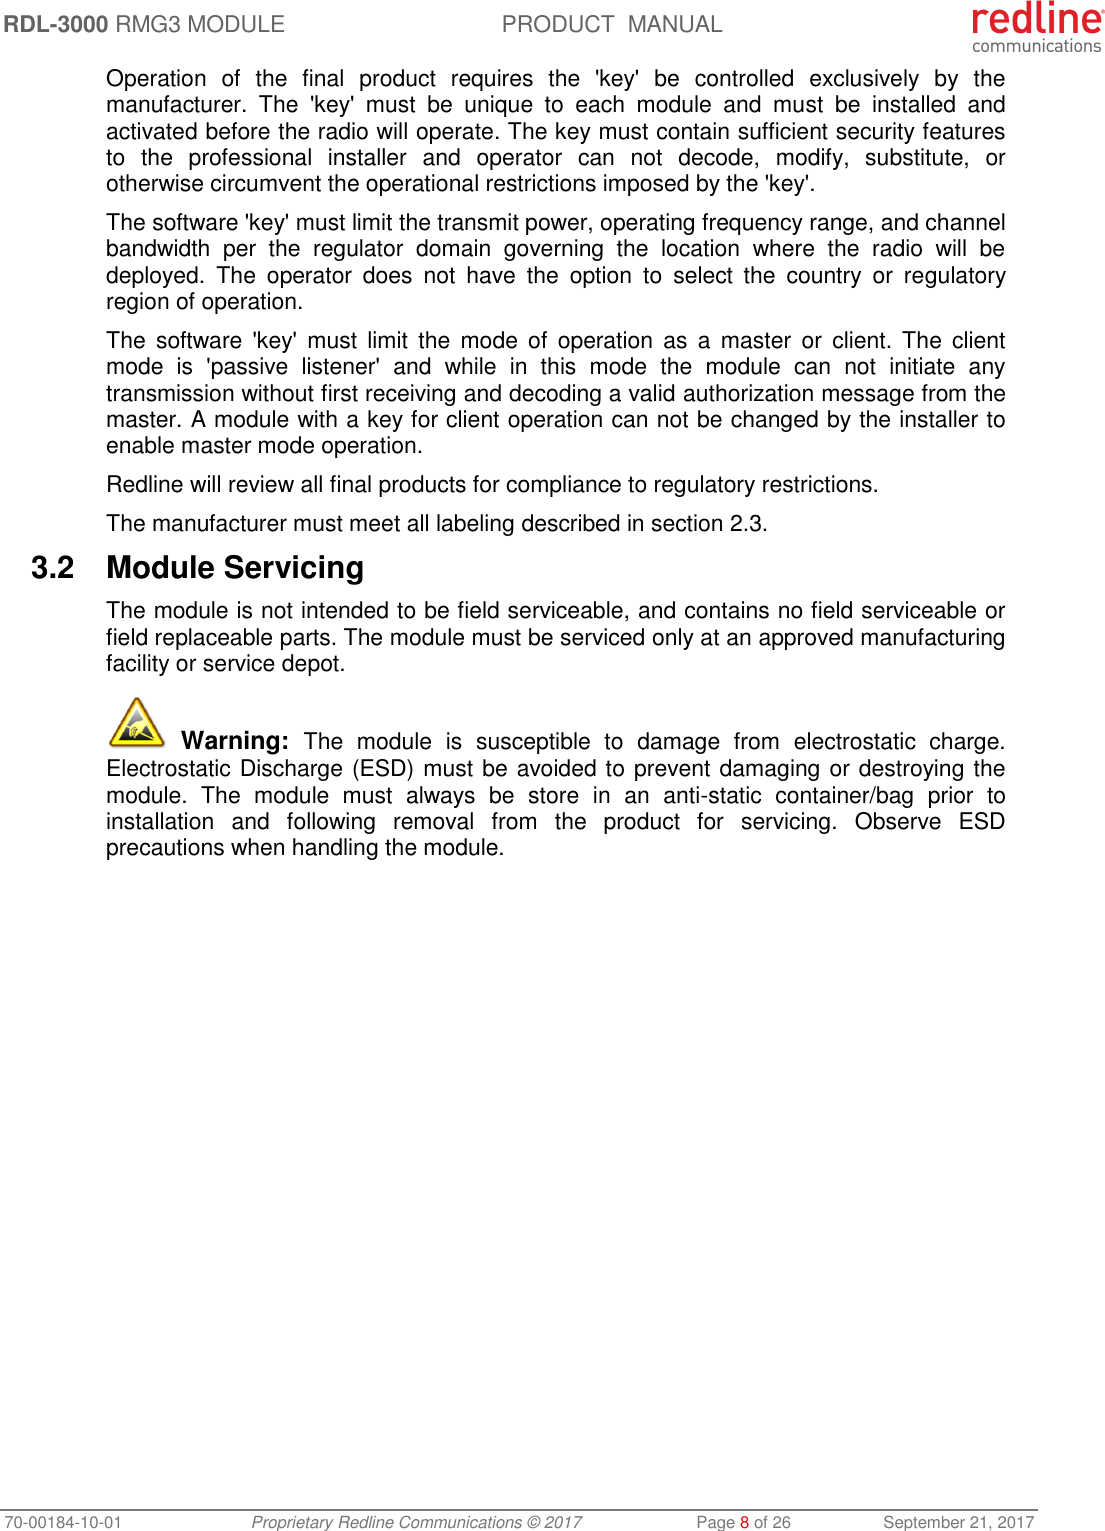 RDL-3000 RMG3 MODULE PRODUCT  MANUAL 70-00184-10-01 Proprietary Redline Communications © 2017  Page 8 of 26  September 21, 2017 Operation  of  the  final  product  requires  the  &apos;key&apos;  be  controlled  exclusively  by  the manufacturer.  The  &apos;key&apos;  must  be  unique  to  each  module  and  must  be  installed  and activated before the radio will operate. The key must contain sufficient security features to  the  professional  installer  and  operator  can  not  decode,  modify,  substitute,  or otherwise circumvent the operational restrictions imposed by the &apos;key&apos;.  The software &apos;key&apos; must limit the transmit power, operating frequency range, and channel bandwidth  per  the  regulator  domain  governing  the  location  where  the  radio  will  be deployed.  The  operator  does  not  have  the  option  to  select  the  country  or  regulatory region of operation. The  software  &apos;key&apos;  must limit  the  mode  of  operation as  a  master  or  client. The  client mode  is  &apos;passive  listener&apos;  and  while  in  this  mode  the  module  can  not  initiate  any transmission without first receiving and decoding a valid authorization message from the master. A module with a key for client operation can not be changed by the installer to enable master mode operation. Redline will review all final products for compliance to regulatory restrictions. The manufacturer must meet all labeling described in section 2.3. 3.2  Module Servicing The module is not intended to be field serviceable, and contains no field serviceable or field replaceable parts. The module must be serviced only at an approved manufacturing facility or service depot.  Warning:  The  module  is  susceptible  to  damage  from  electrostatic  charge. Electrostatic Discharge (ESD) must be avoided to prevent damaging or destroying the module.  The  module  must  always  be  store  in  an  anti-static  container/bag  prior  to installation  and  following  removal  from  the  product  for  servicing.  Observe  ESD precautions when handling the module. 